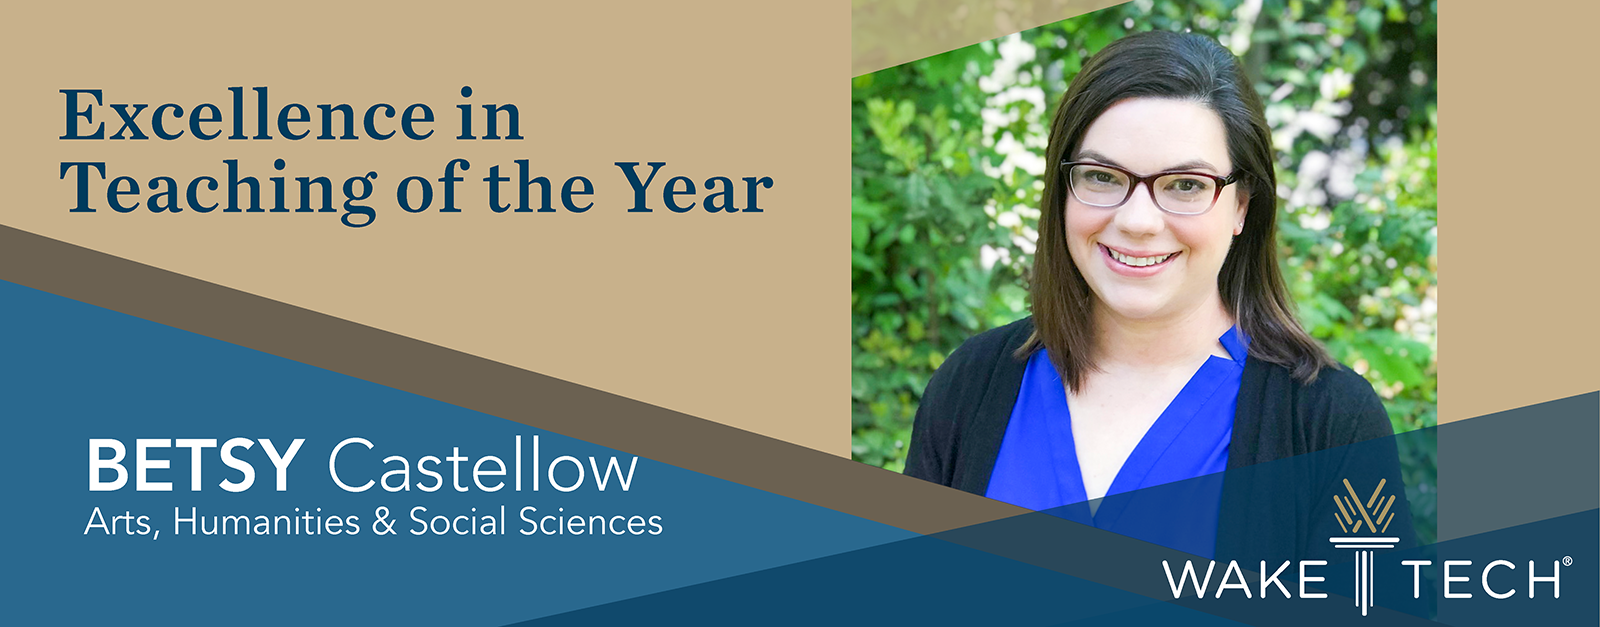 Excellence in Teaching - Betsy Castellow